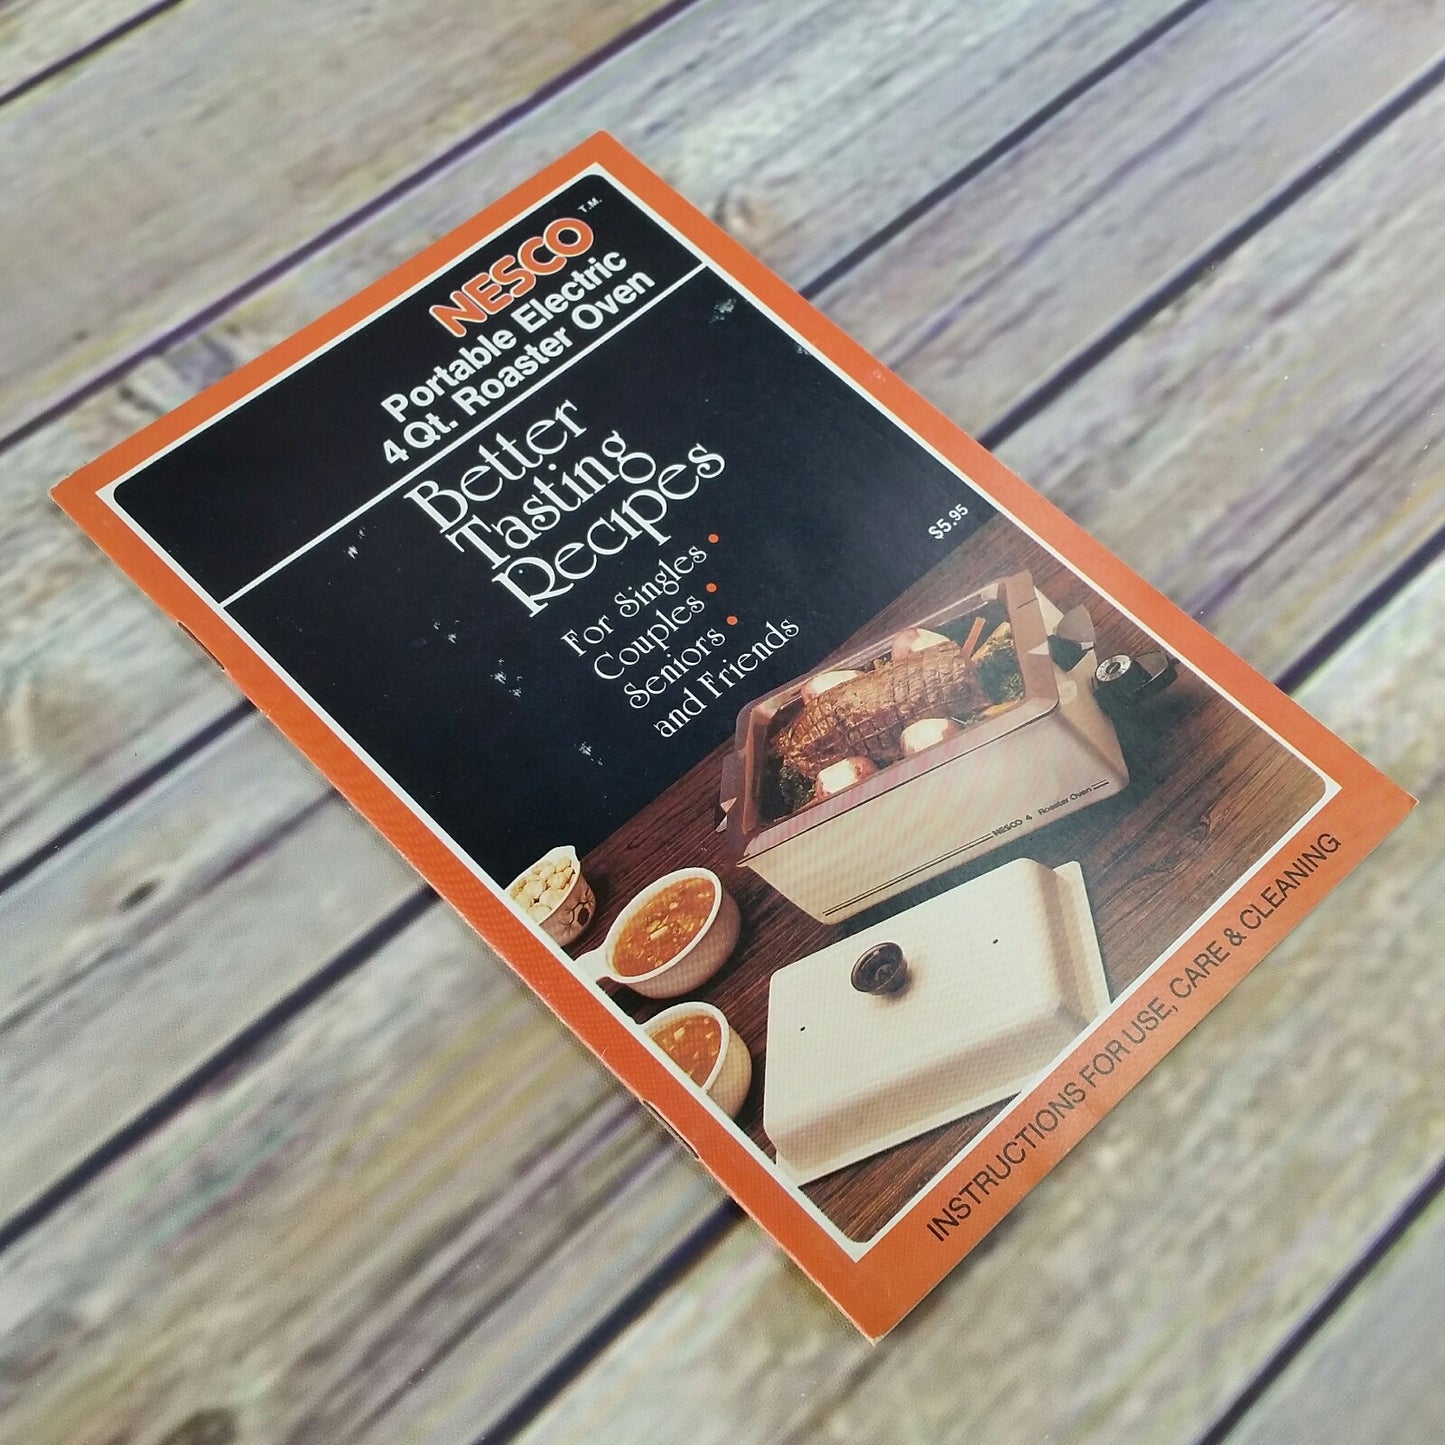 Vintage Cookbook Nesco Portable Electric 4 qt Roaster Oven Cooking Recipes Promo 1970s 1980s Manual Booklet Instructions - At Grandma's Table